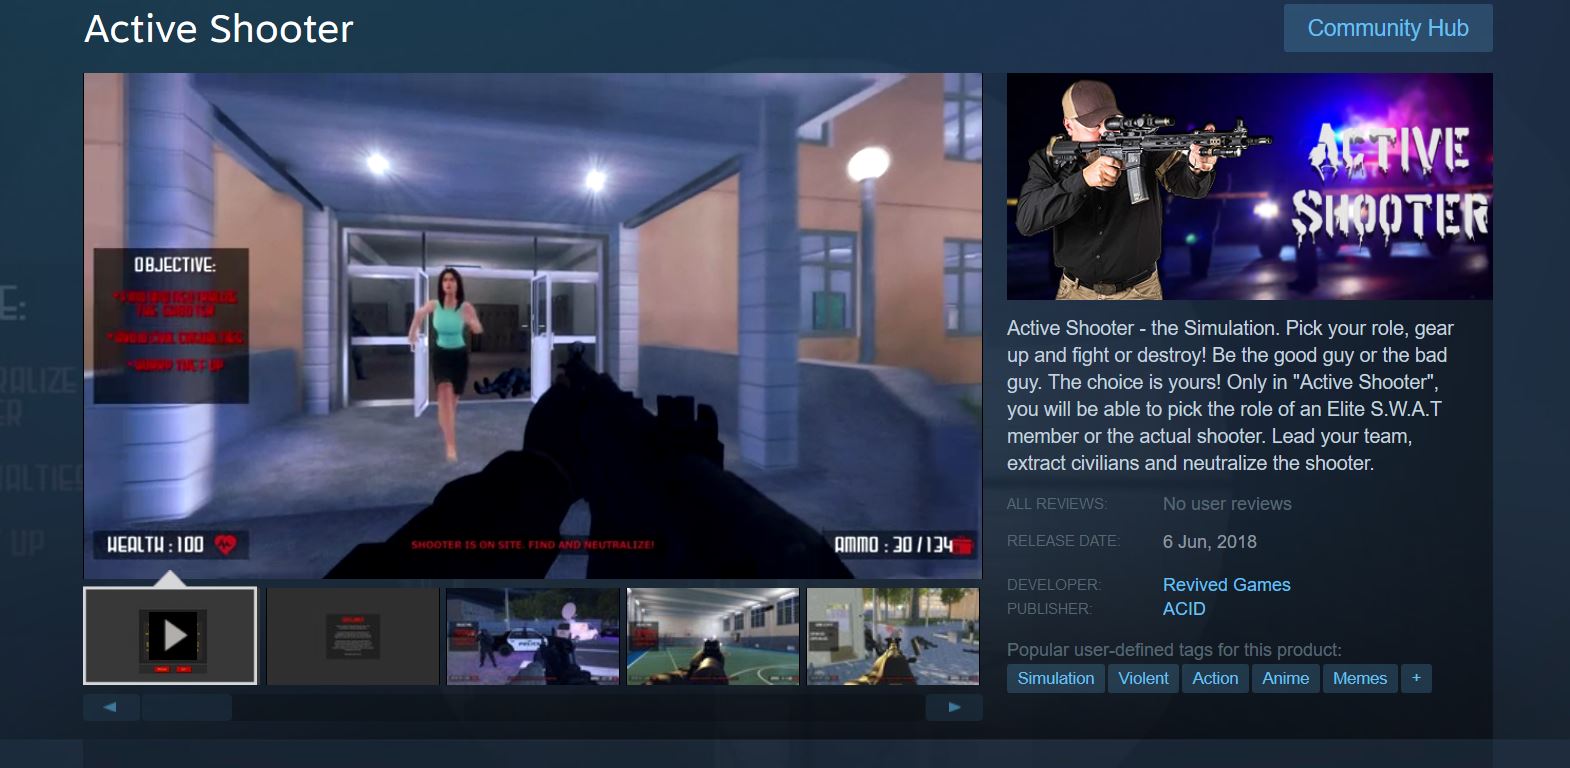 Active Shooter simulator game on Steam is insensitive to victims of mass shootings - Canadian Reviewer